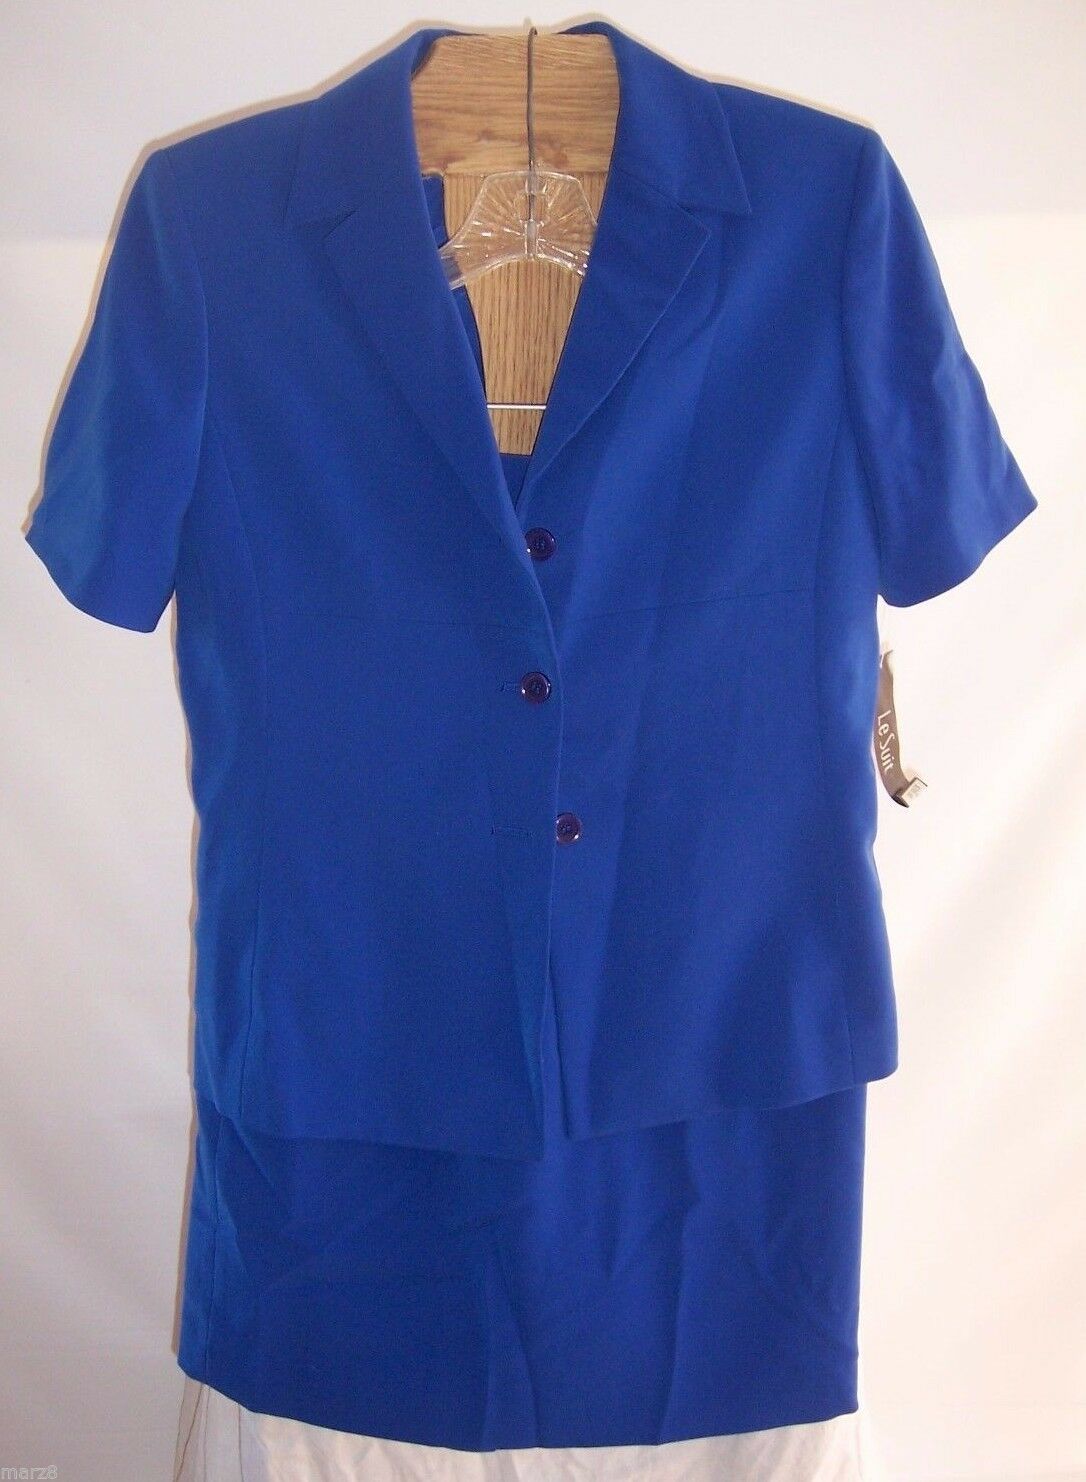 Primary image for NWT Le Suit Ceramic Blue Polyester Jacket Skirt Suit Misses Size 10